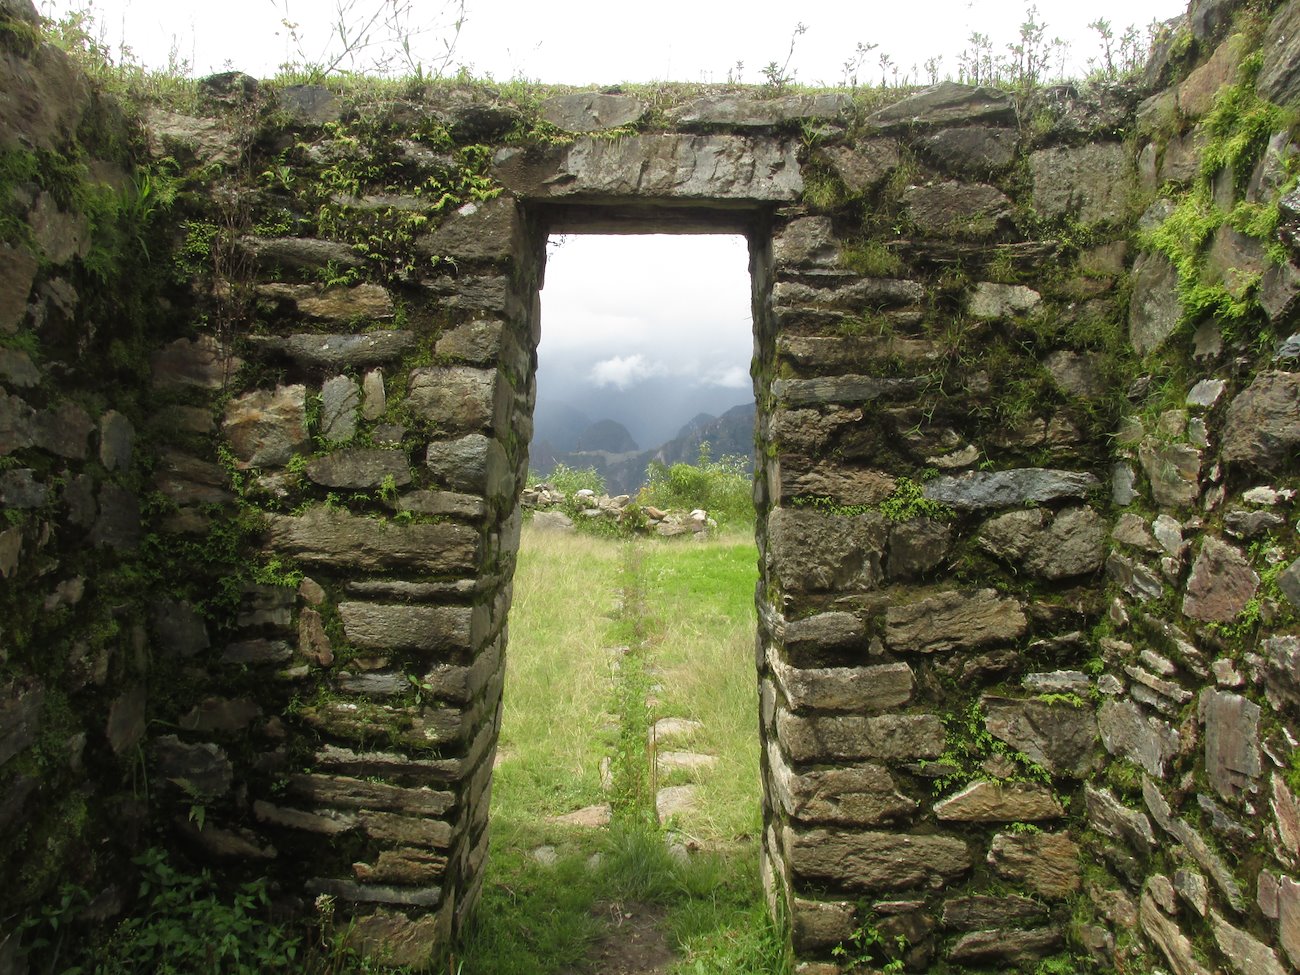 This door way with an irrigation canal cut in front of it points directly to Machu Picchu